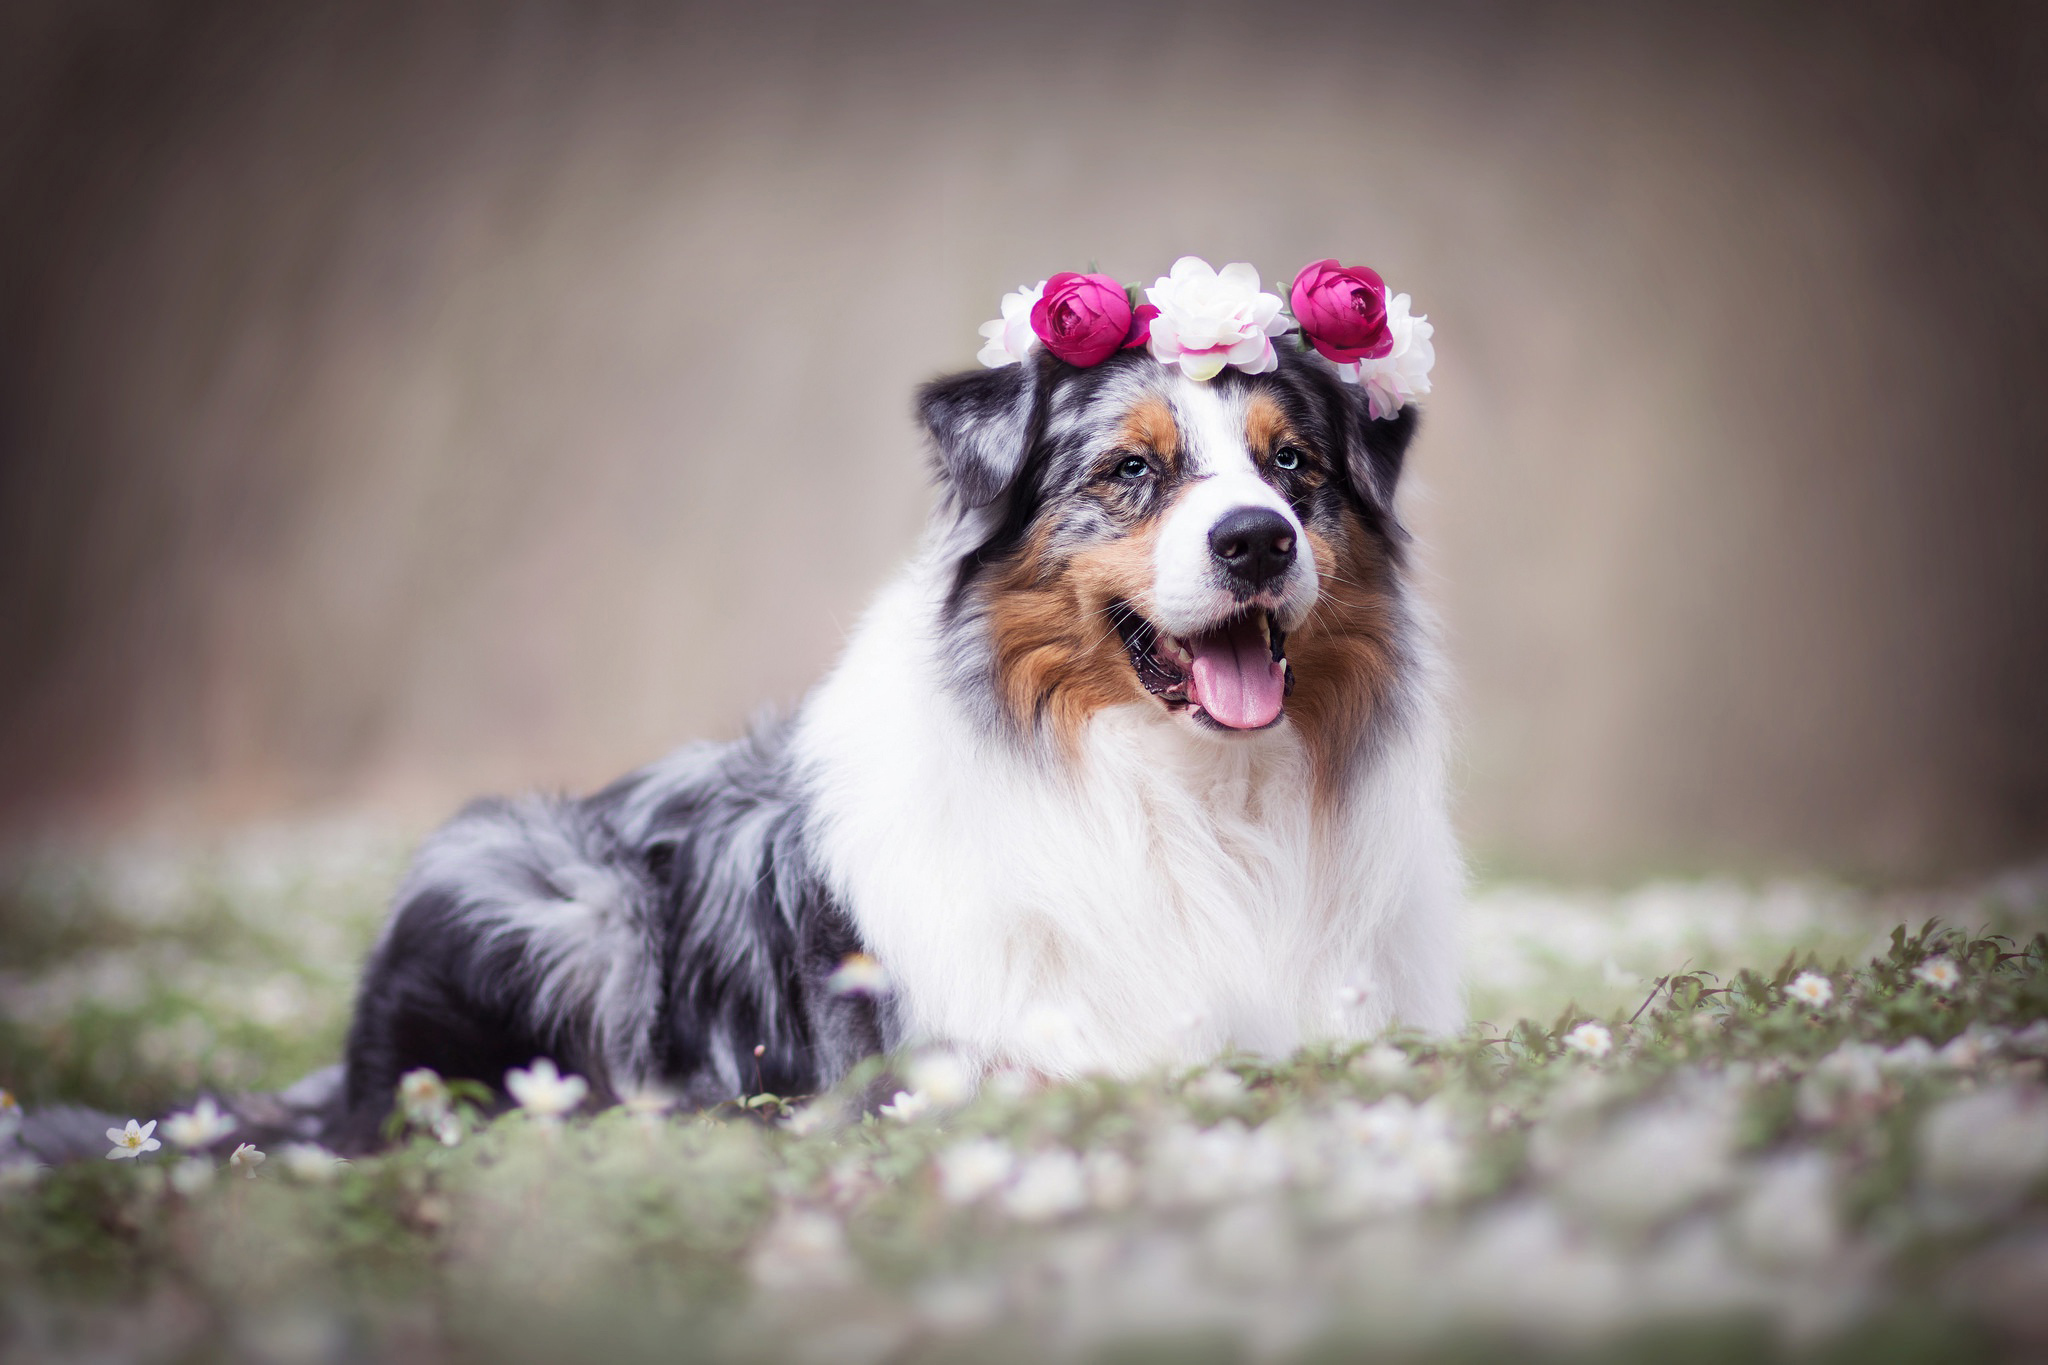 A dog with a wreath on his head · free photo